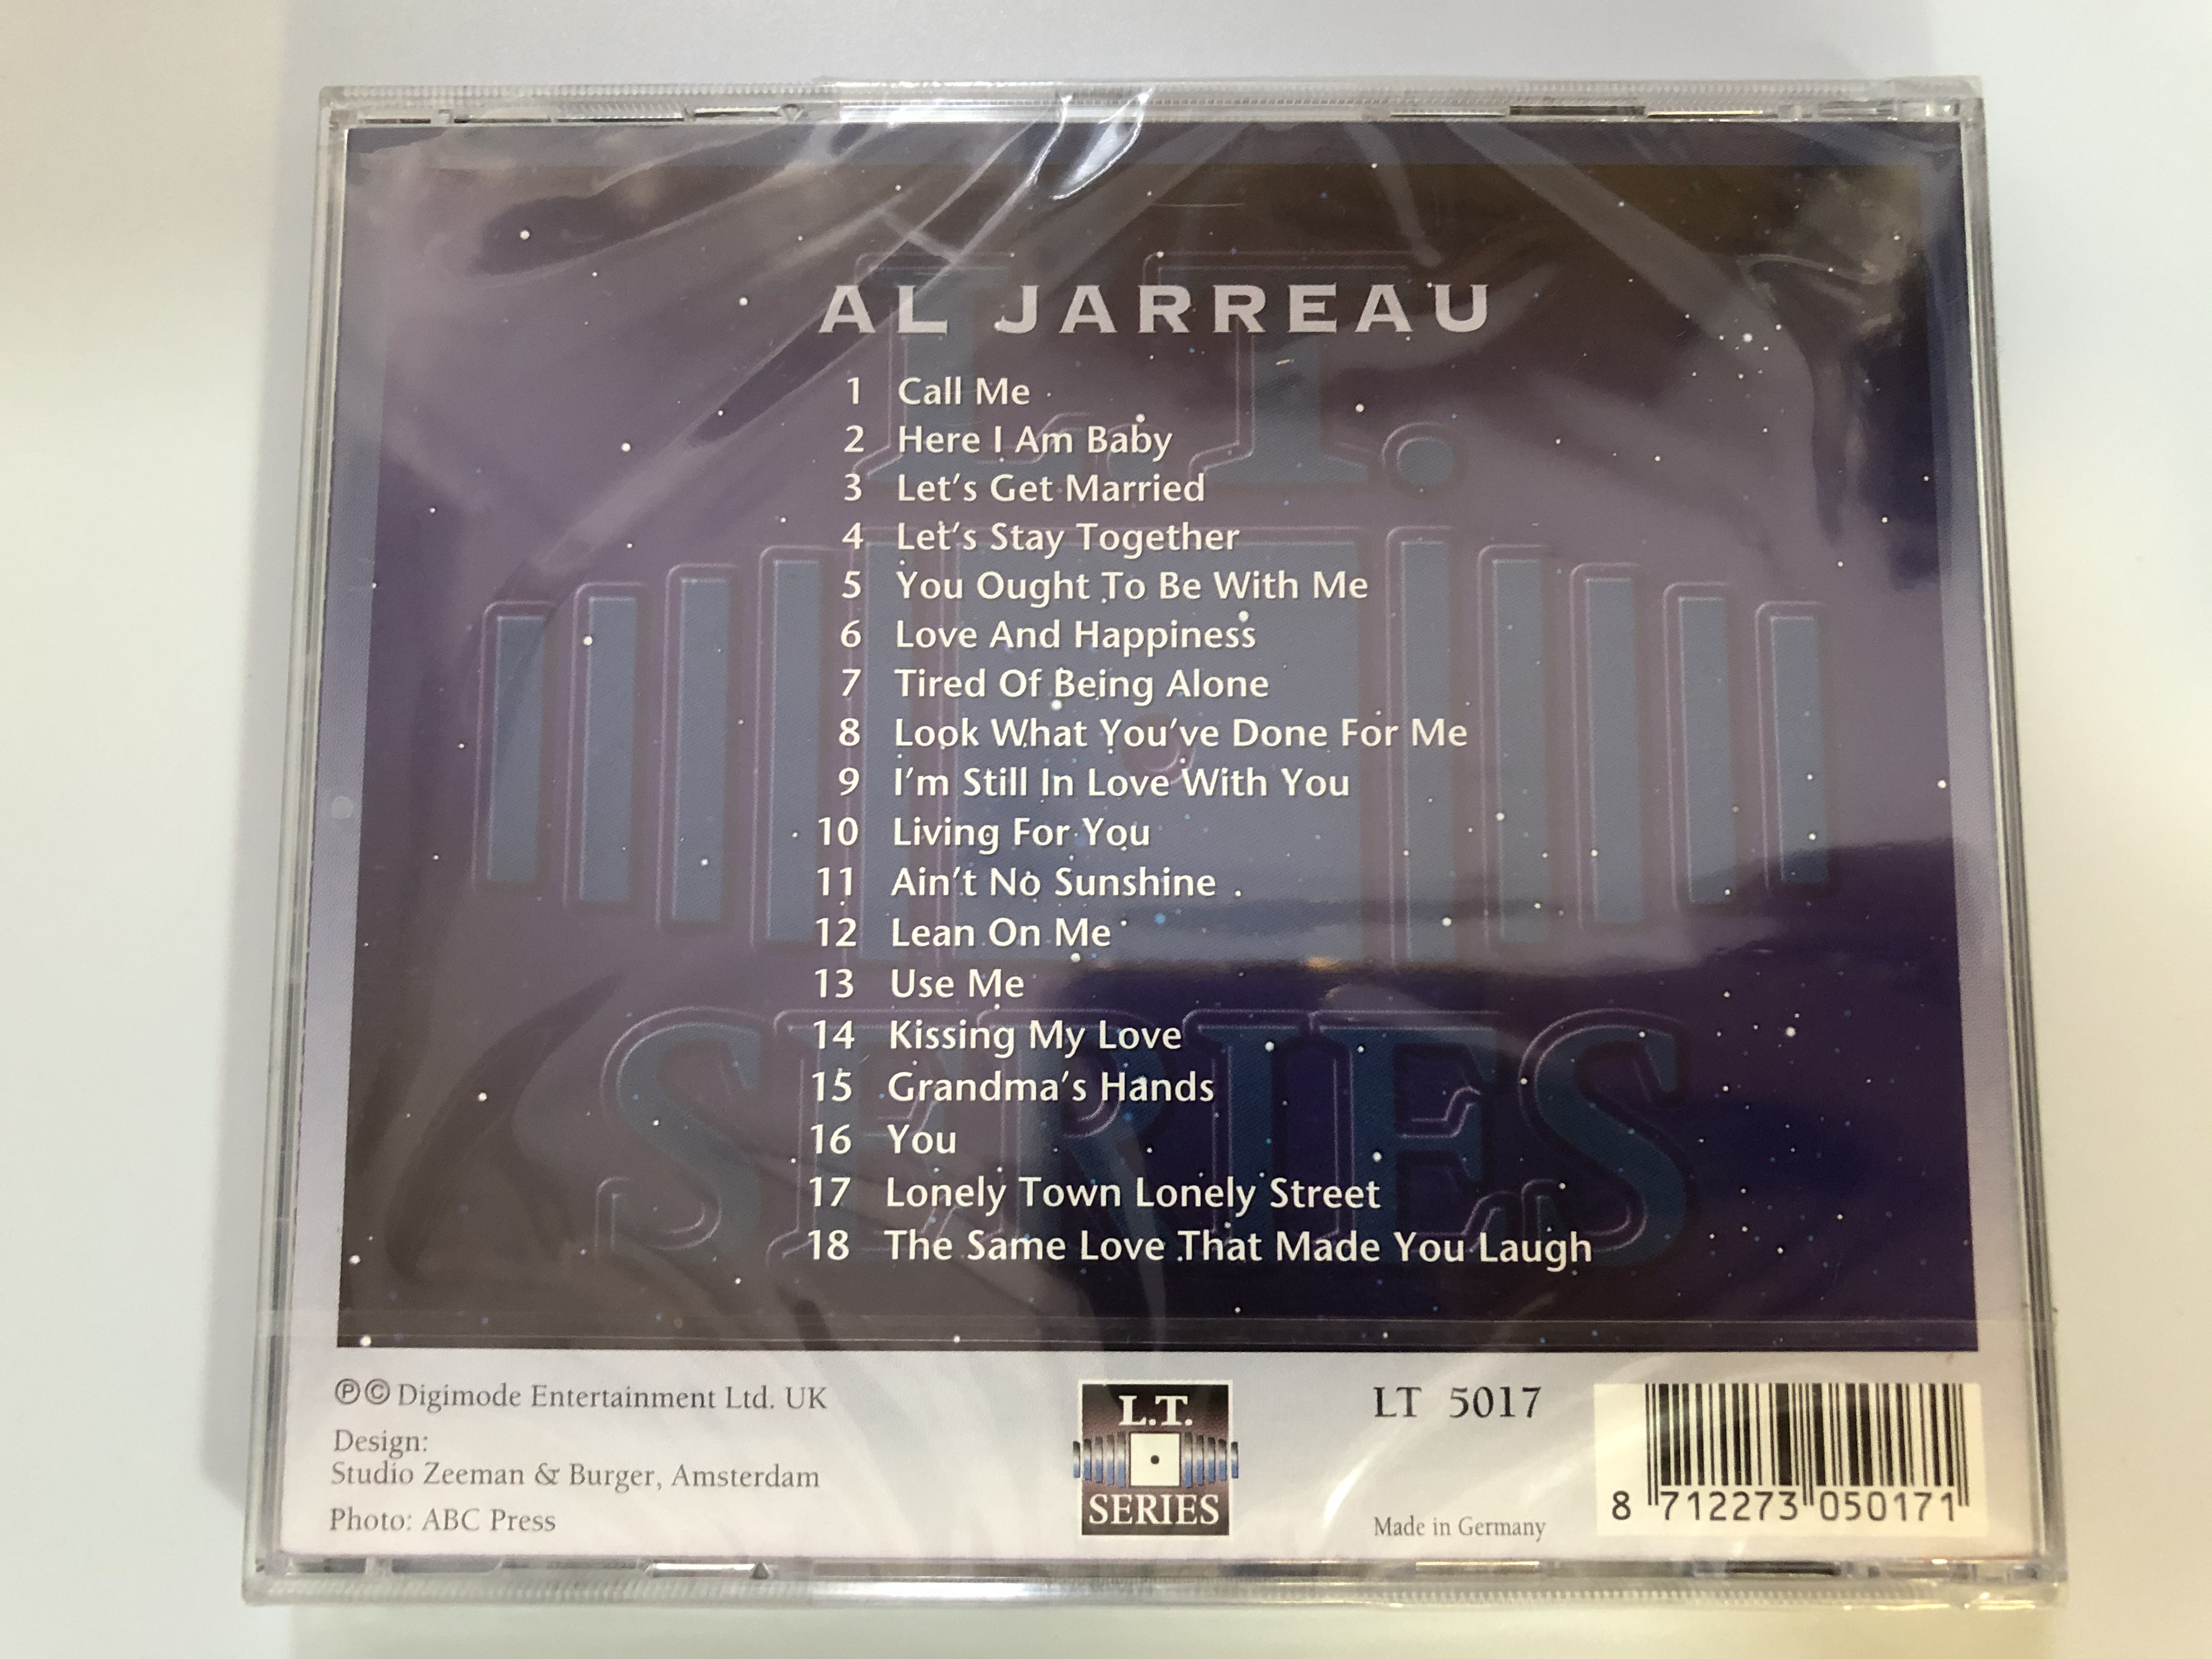 al-jarreau-ain-t-no-sunshine-let-s-stay-together-love-and-happiness-lean-on-me-you-life-time-records-audio-cd-2001-lt-5017-2-.jpg